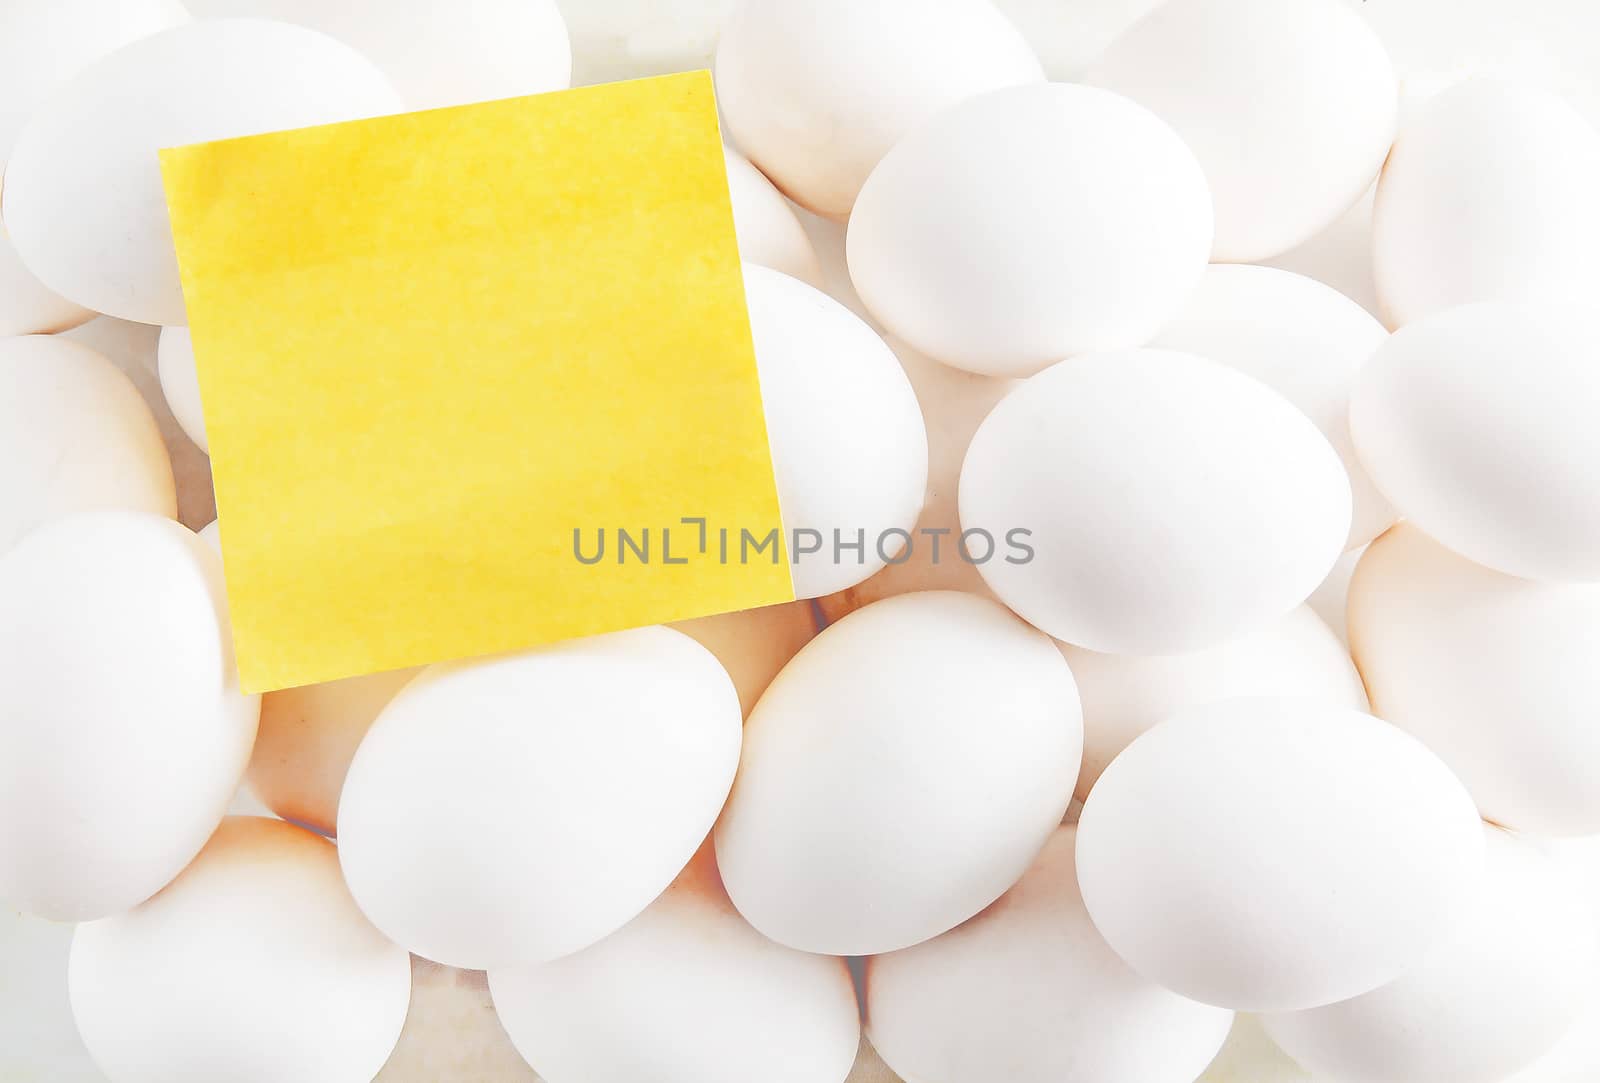 blank yellow sticker on the background of white eggs/